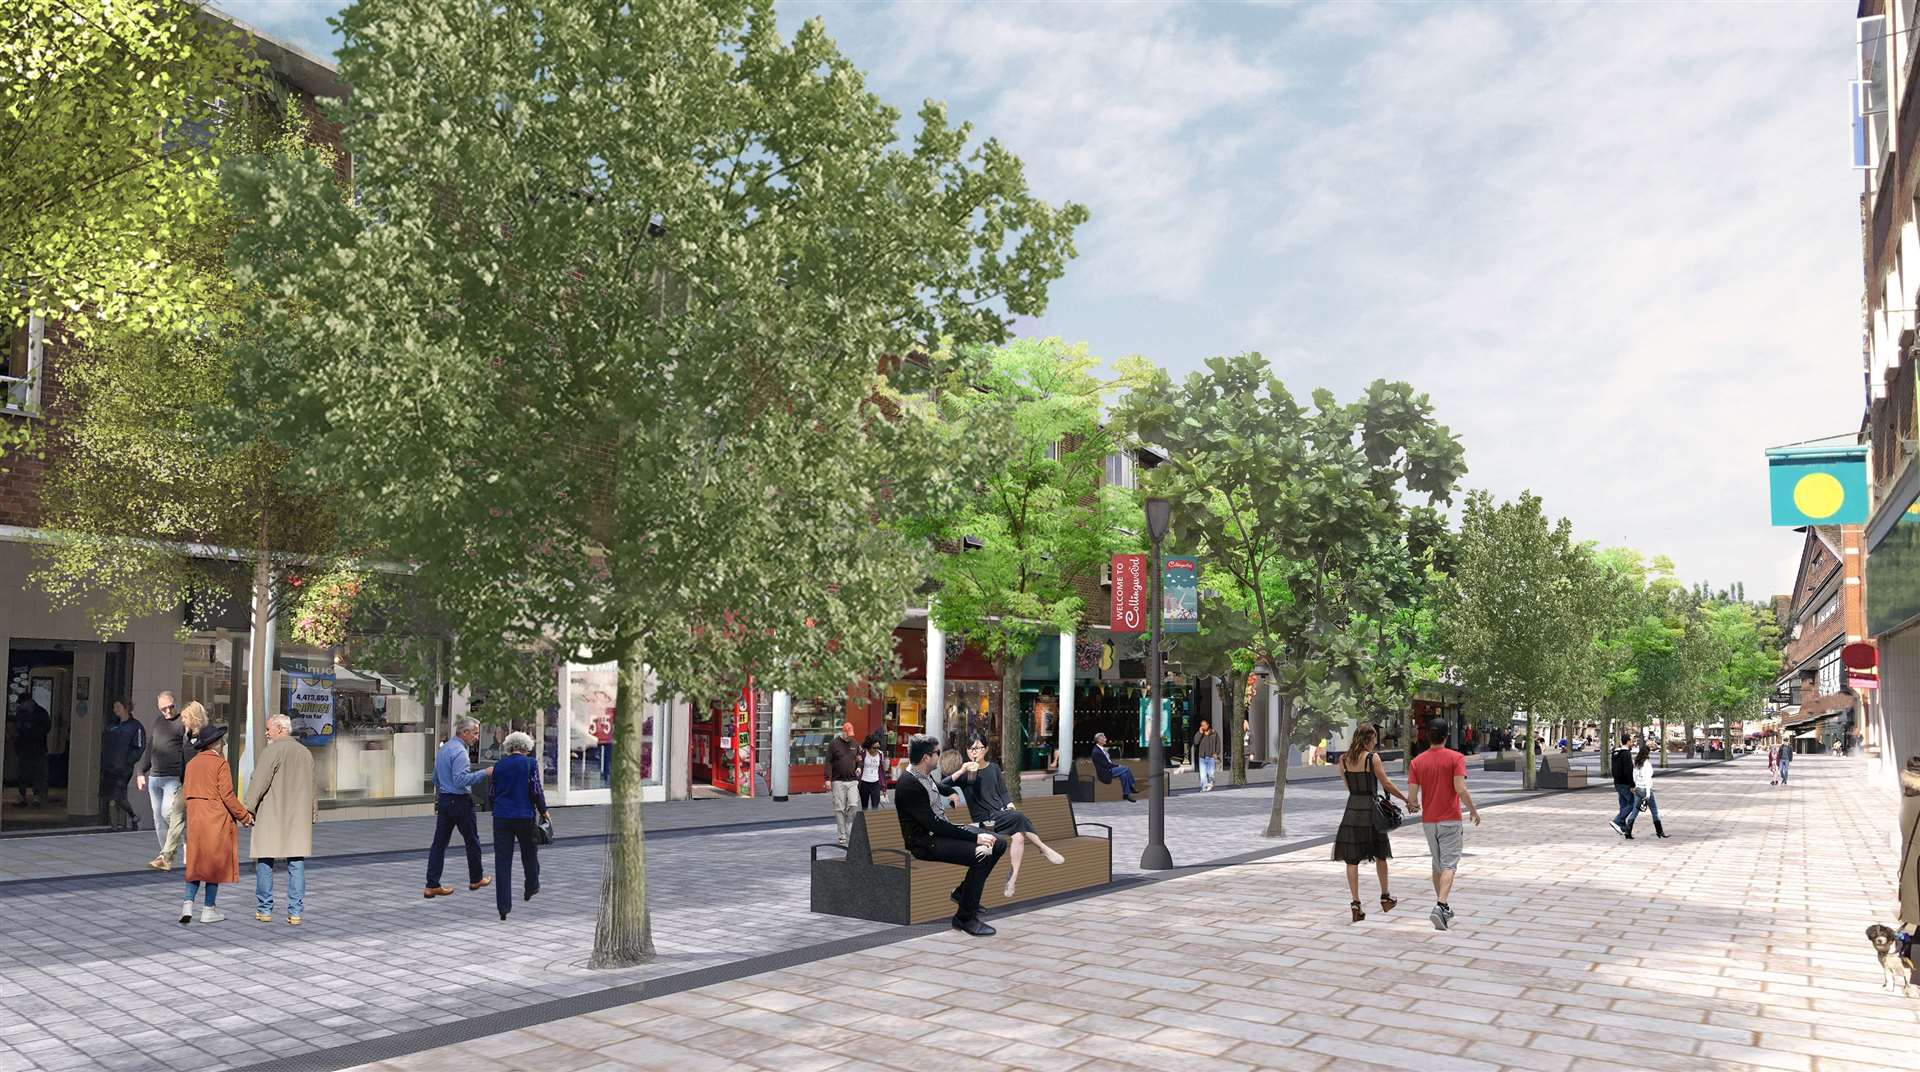 The council wants to create a boulevard-style street